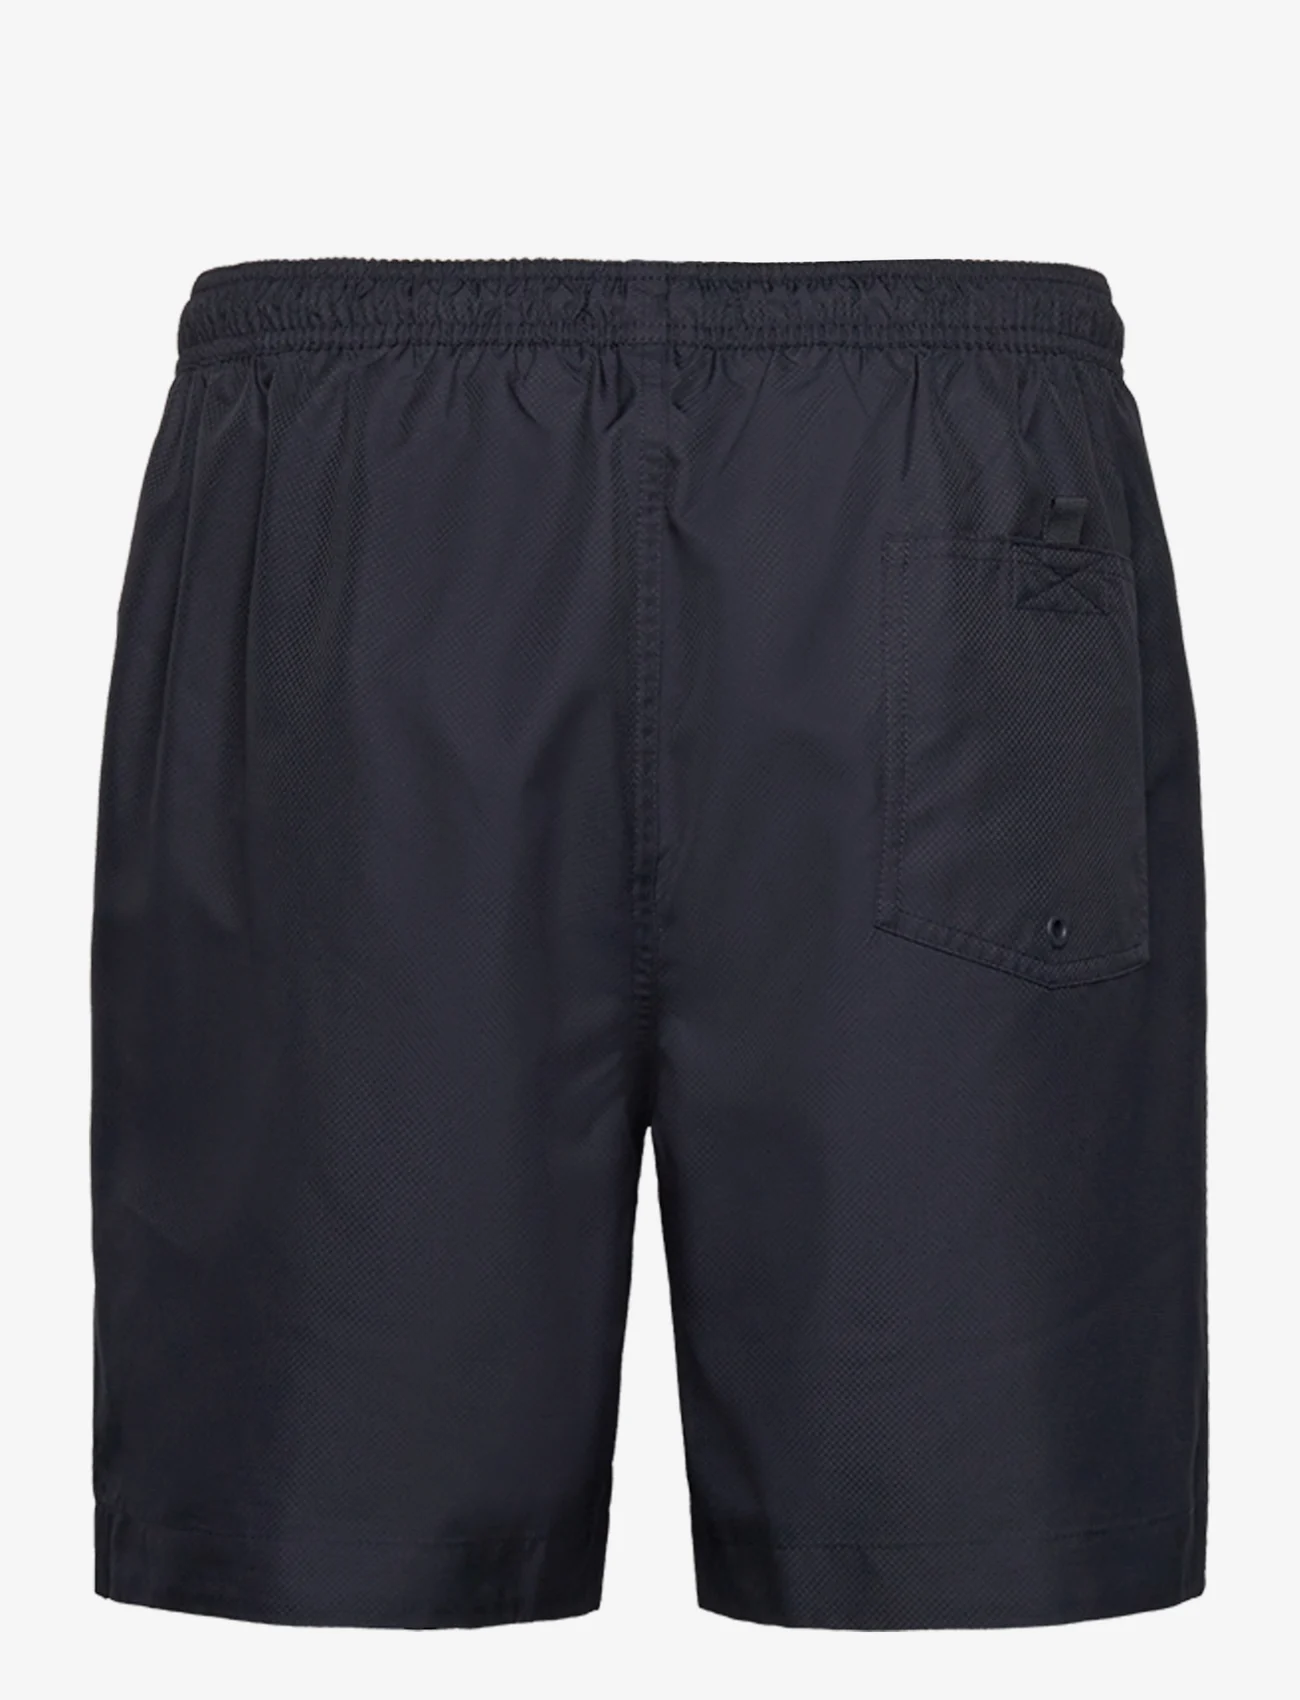 Fred Perry - CLASSIC SWIMSHORT - badeshorts - navy - 1